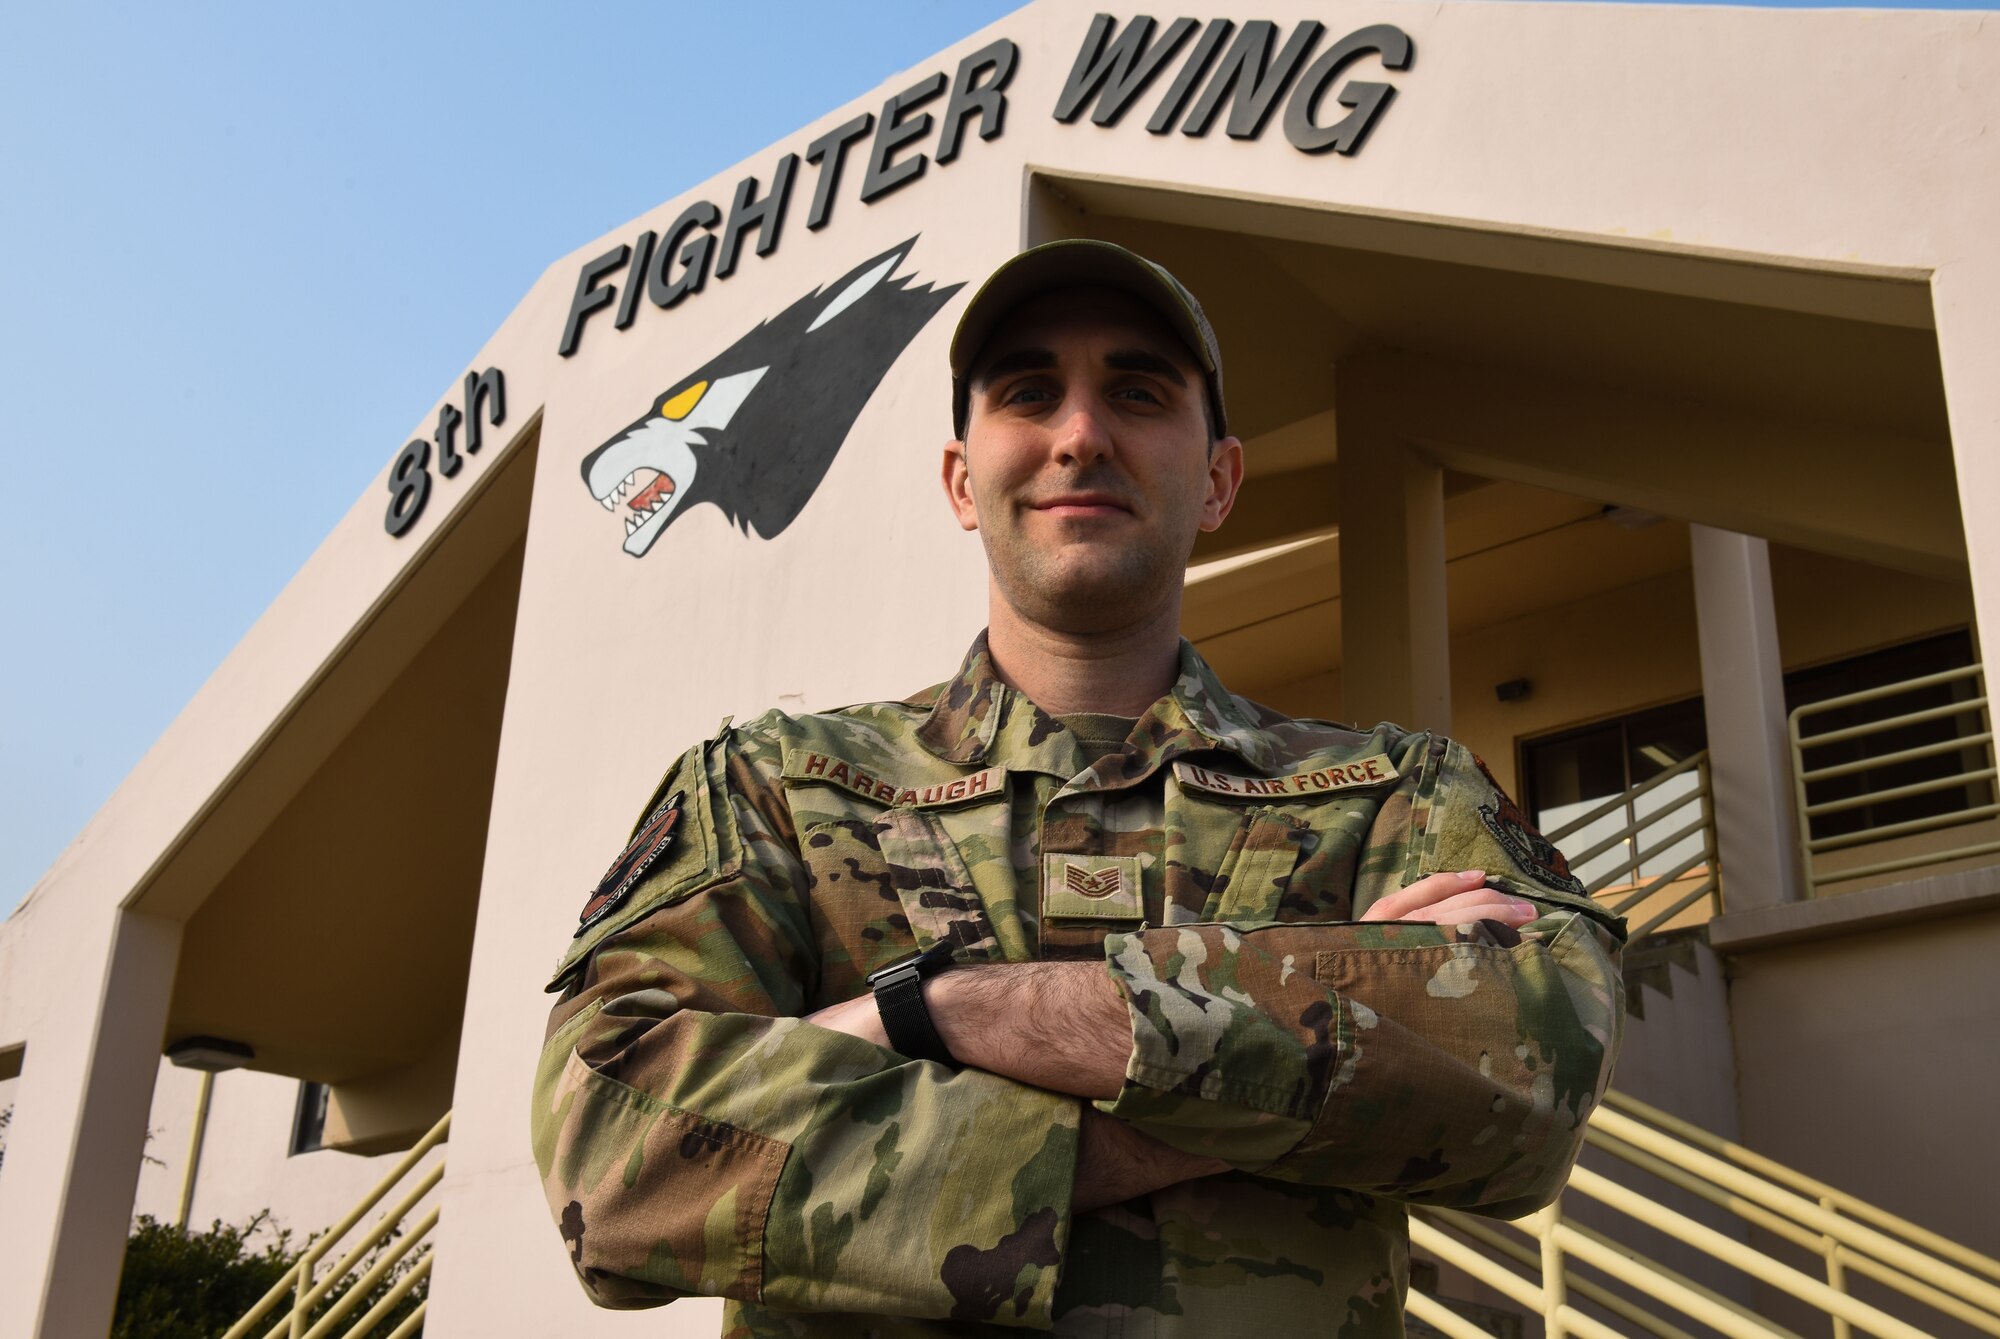 Tech. Sgt. David Harbaugh, 8th Fighter Wing occupational safety manager, poses for a photo on Kunsan Air Base, Republic of Korea, Jan. 5, 2023. As an occupational safety manager, Harbaugh is responsible for advising commanders of on-the-job risks and providing recommendations to mitigate or reduce those risks to enable the wing’s critical mission. (U.S. Air Force photo by Tech. Sgt. Timothy Dischinat).